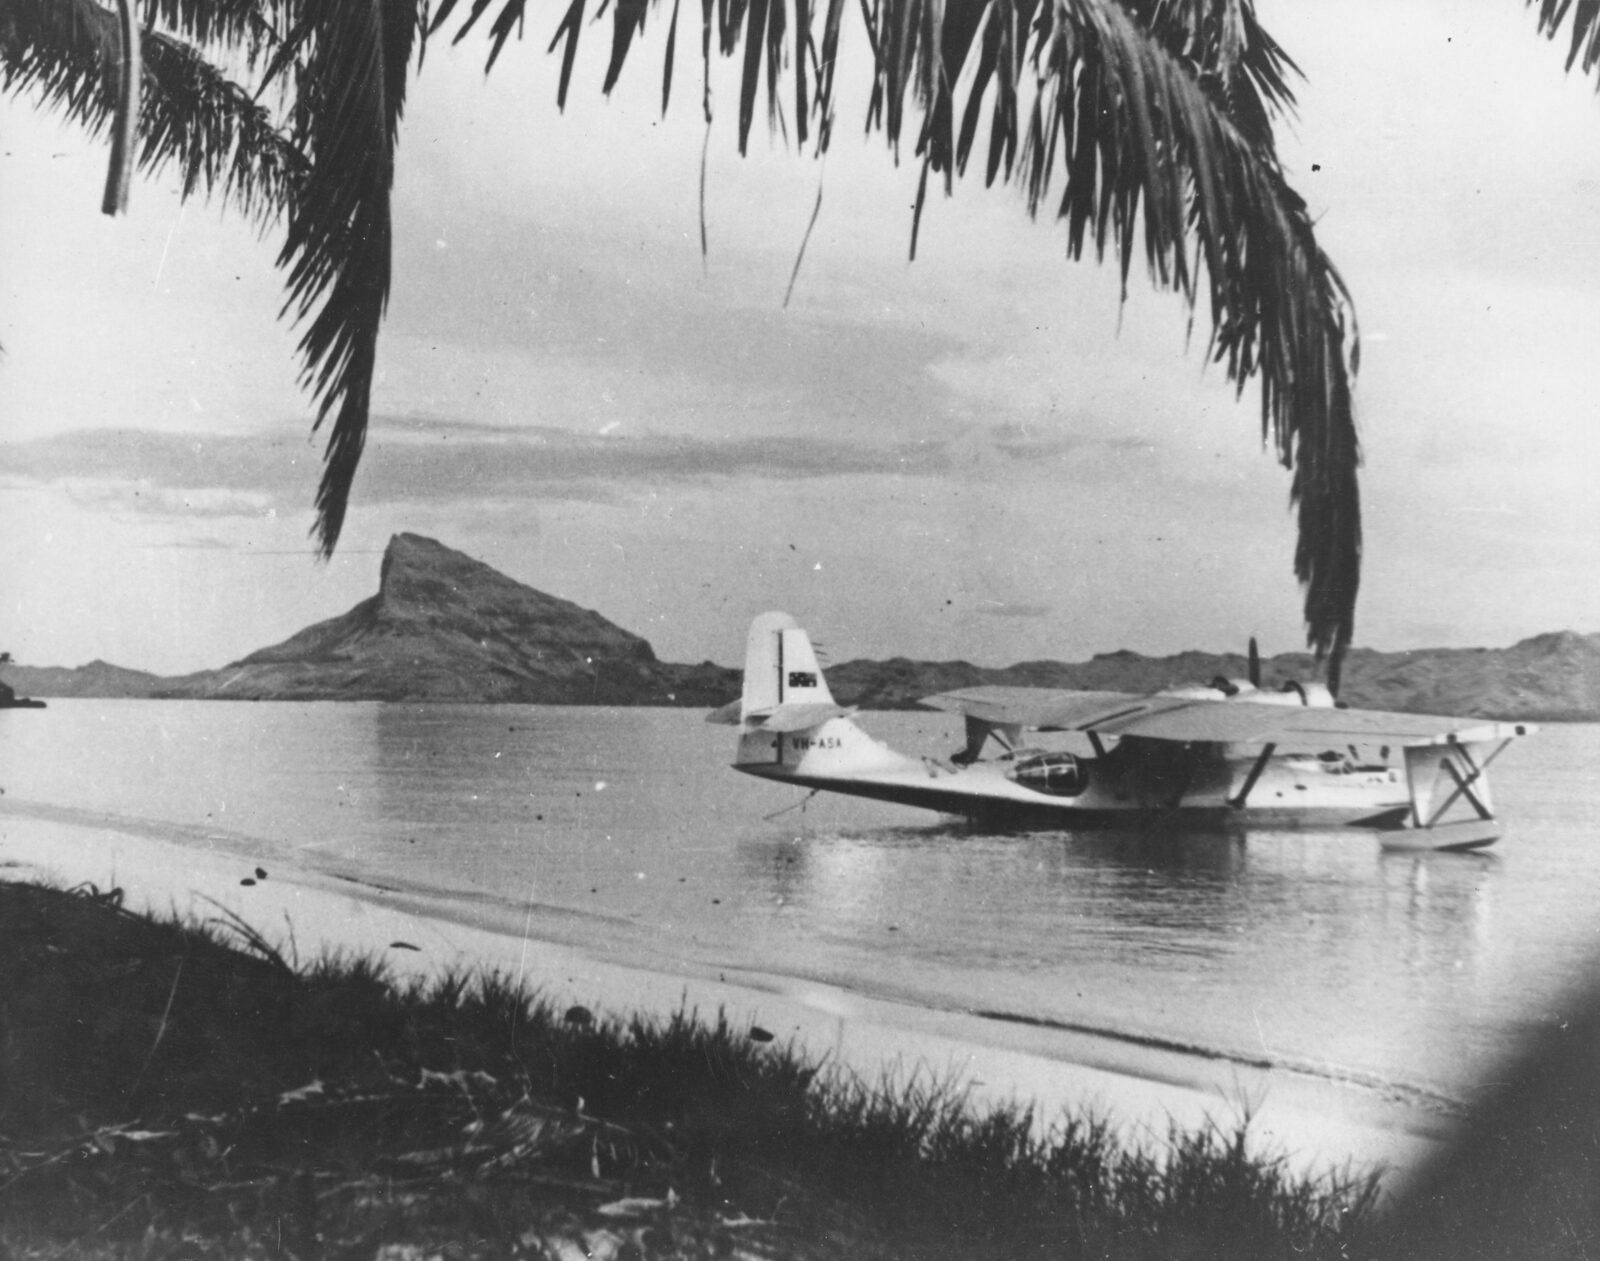 Black and white image of the Catalina Frigate II on the lagoon at Mangareva